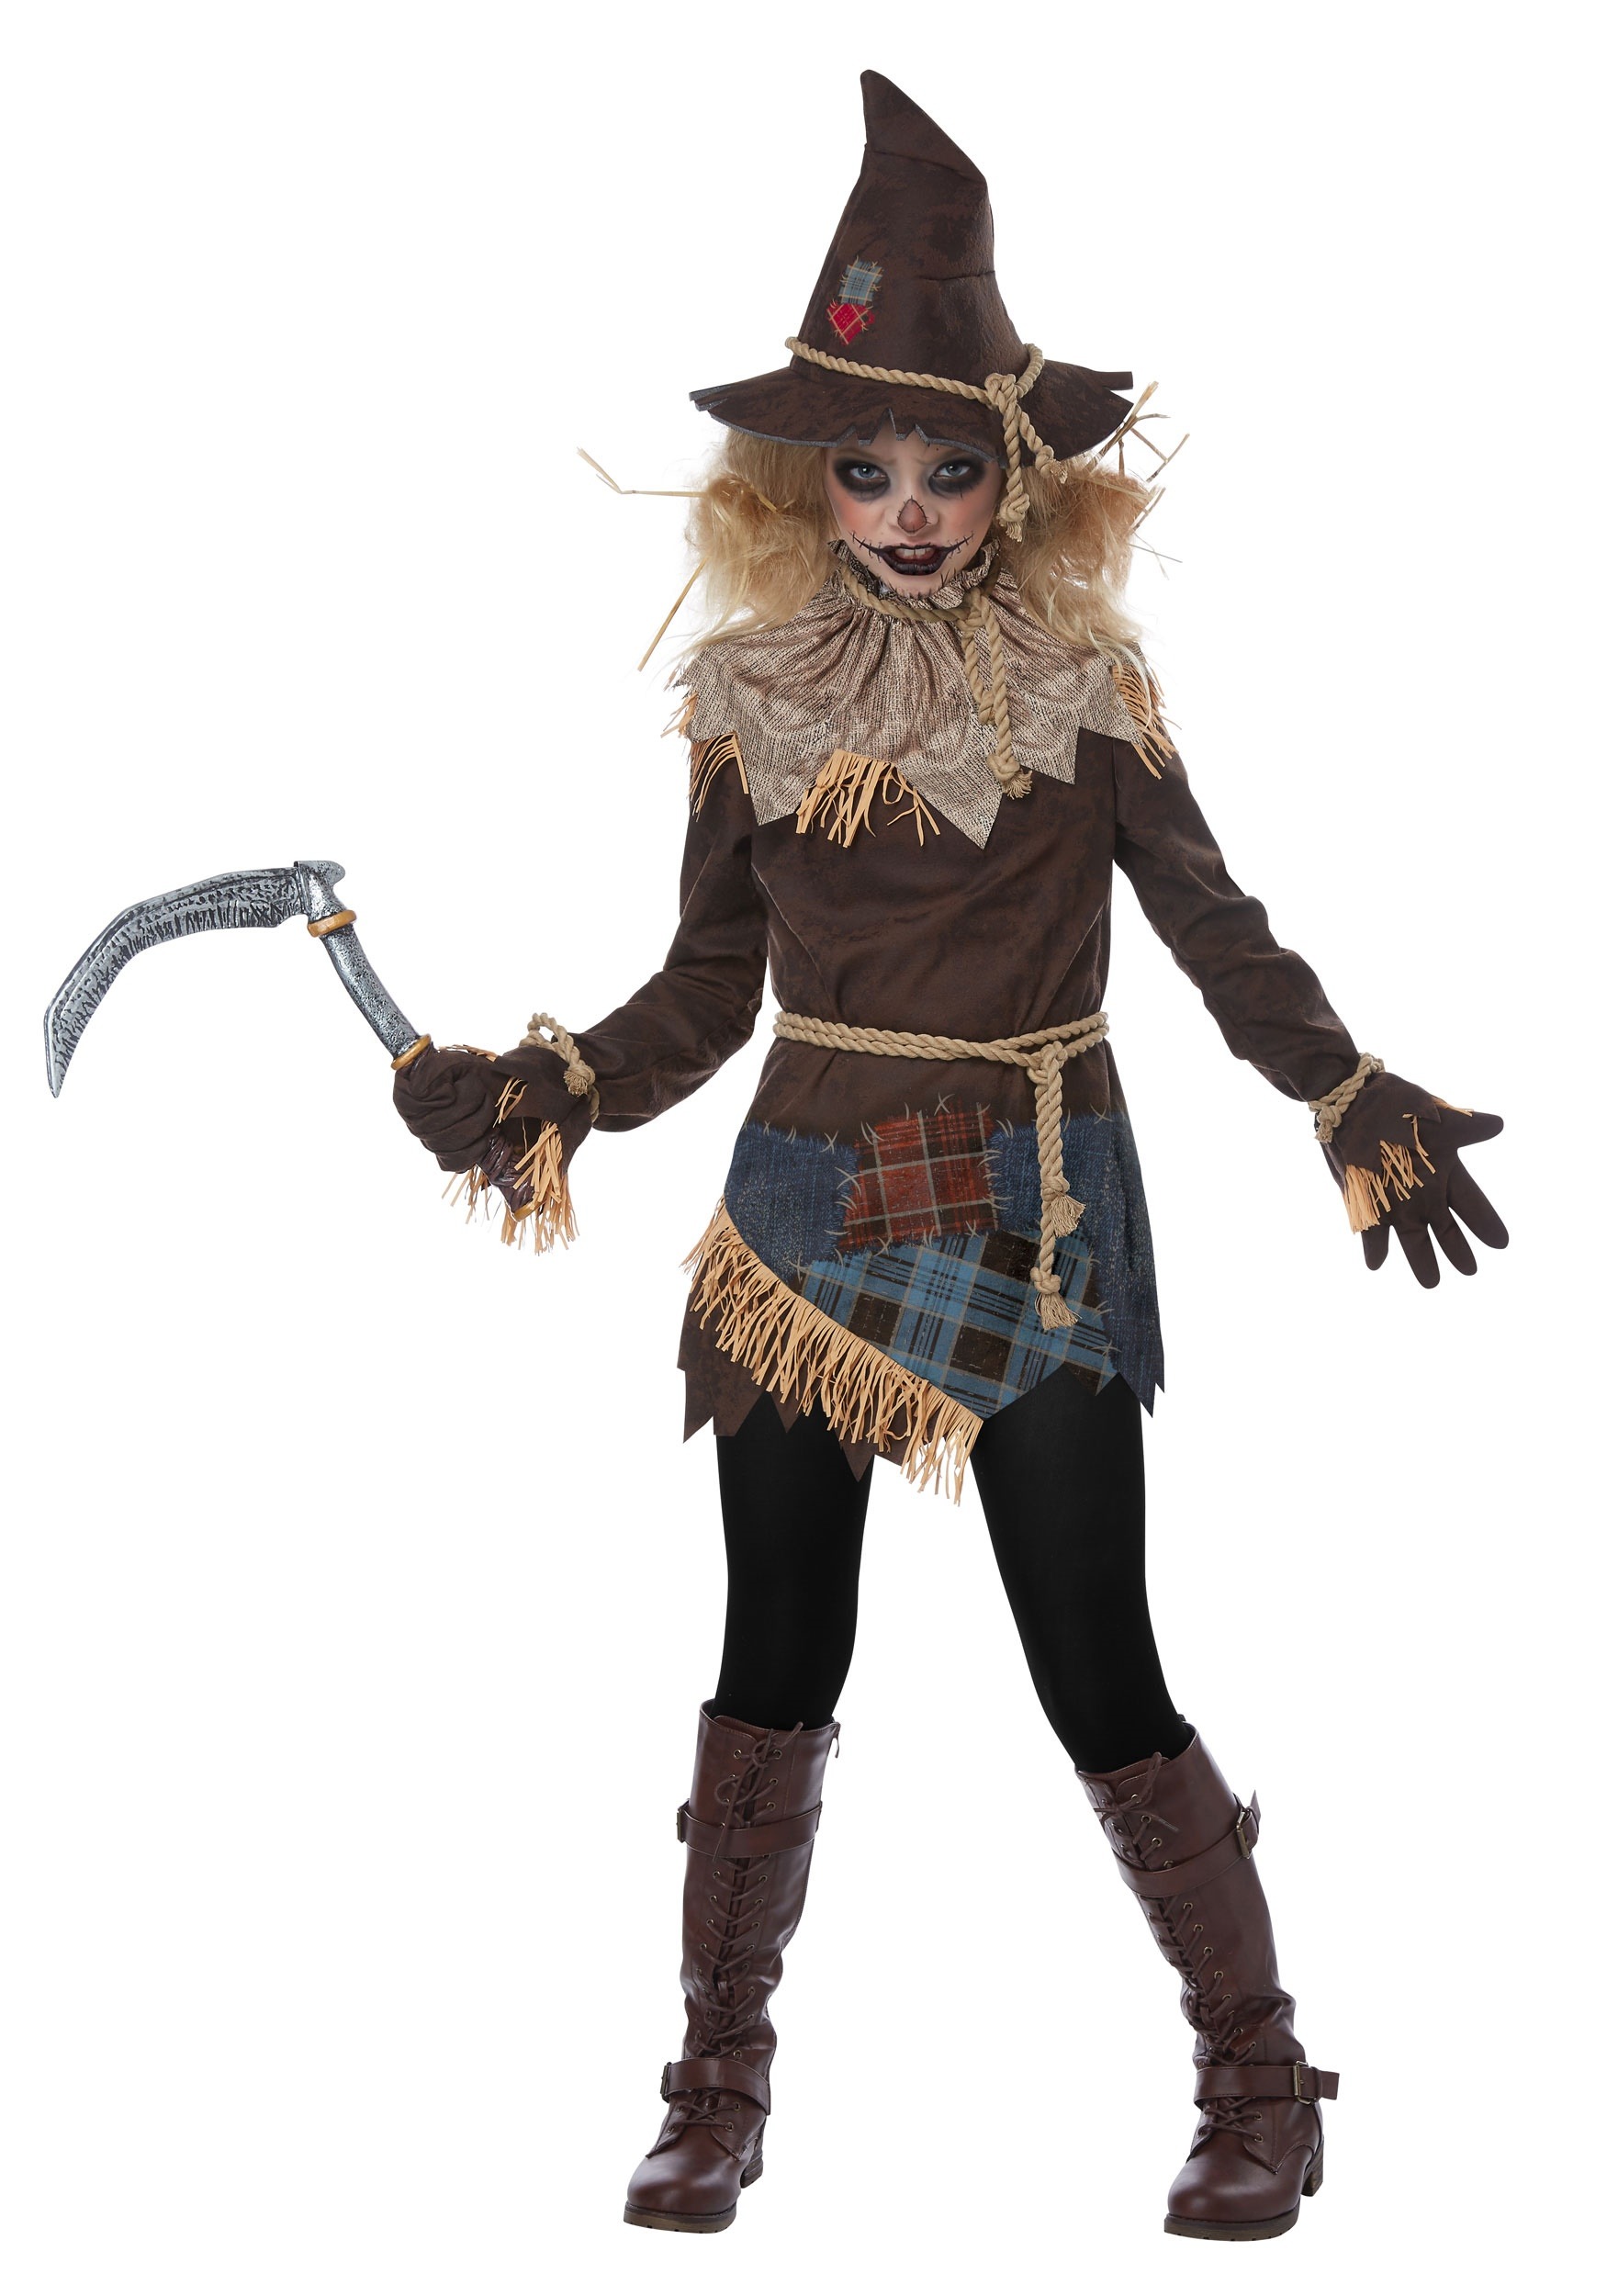 Photos - Fancy Dress California Costume Collection Creepy Scarecrow Costume for Girls | Scary G 